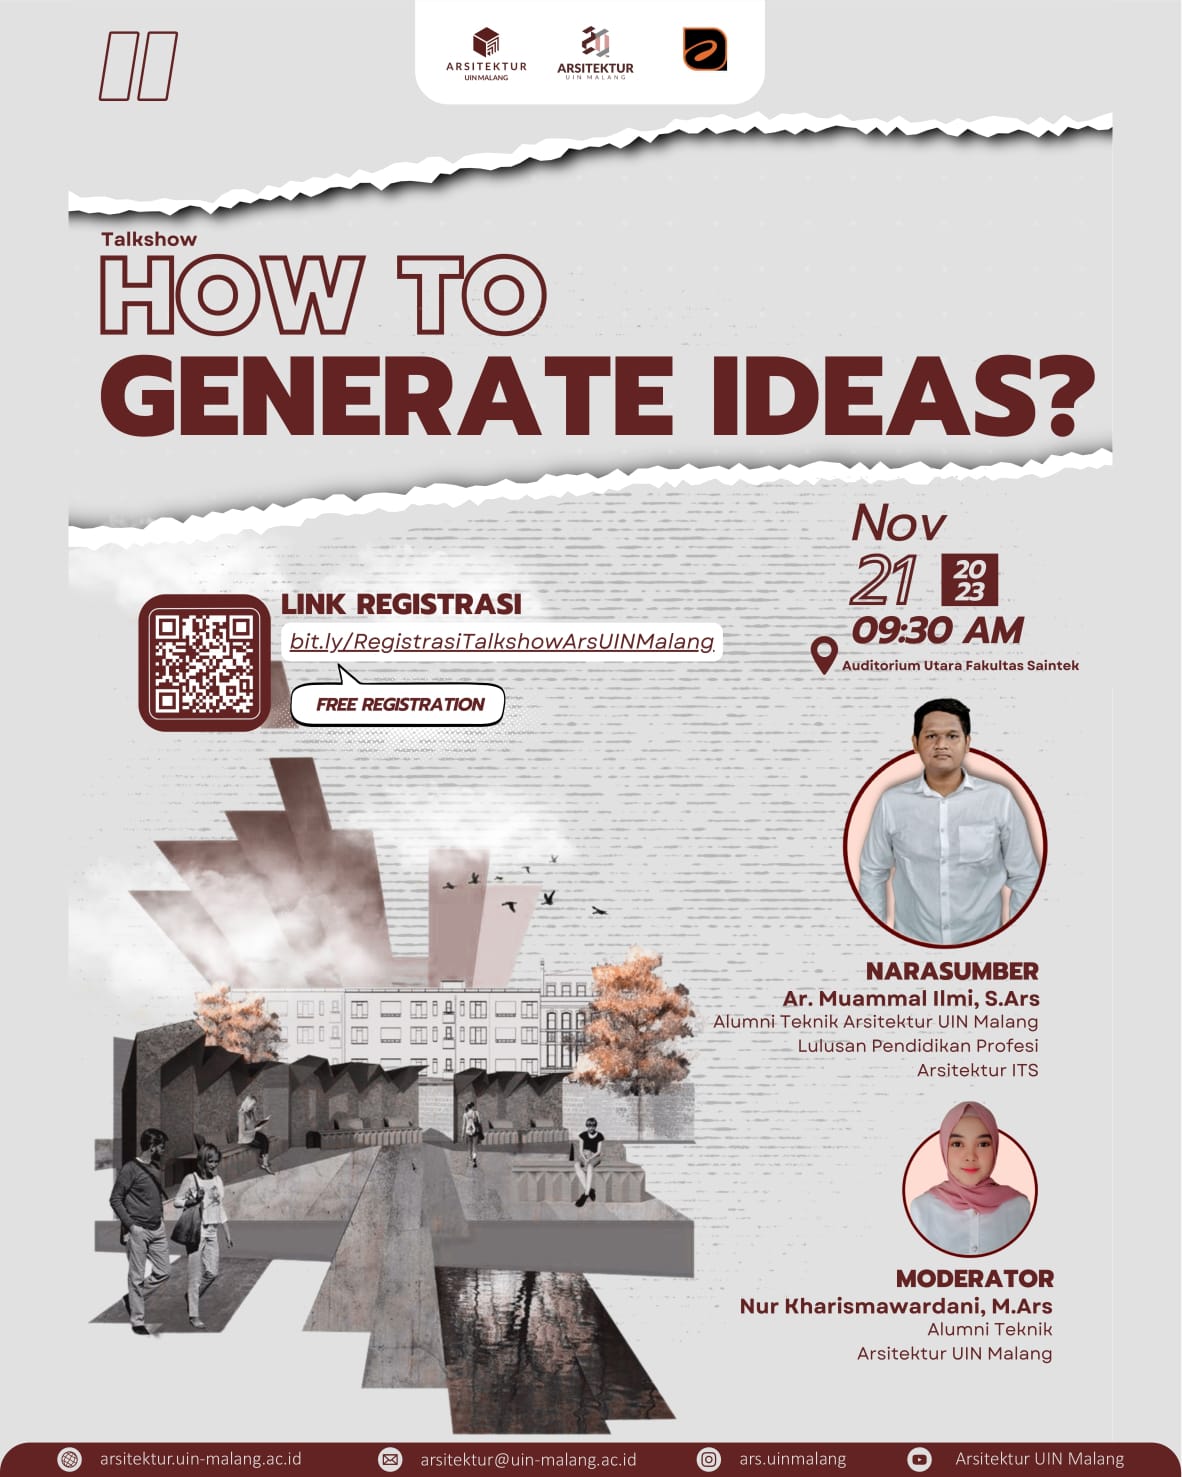 TalkShow Series 3.0 “HOW TO GENERATE IDEAS?”